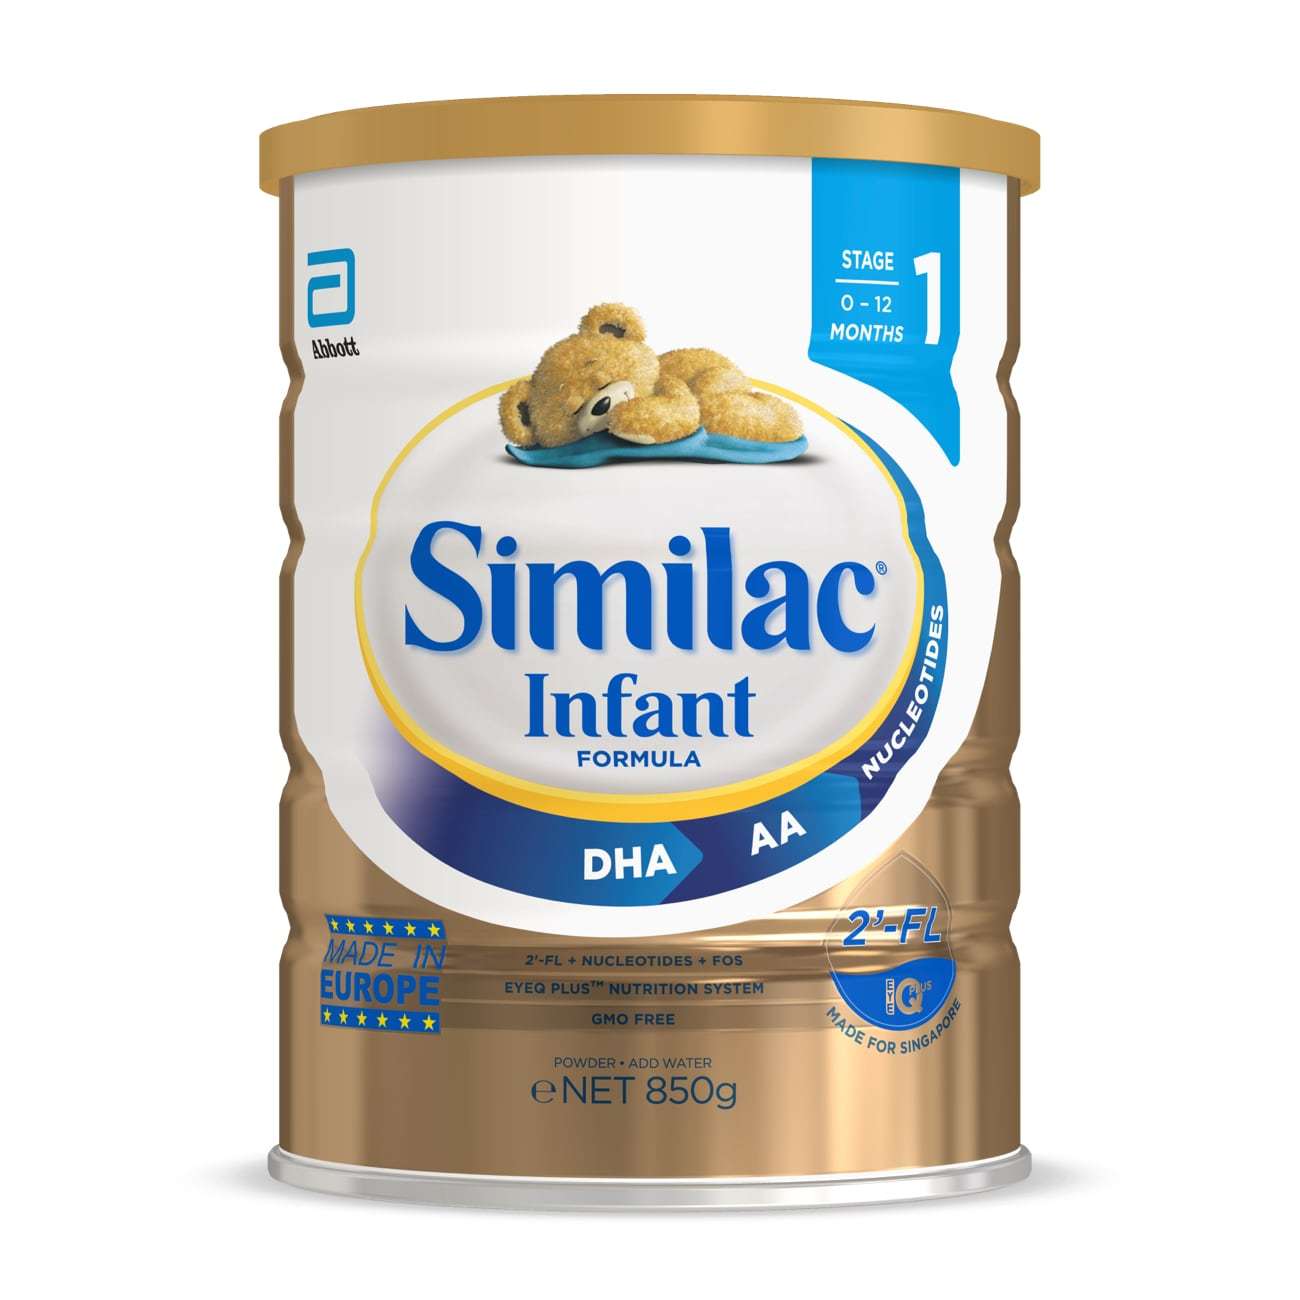 Similac Baby Formula Powder, Imported, with 2’-FL HMO, 850 g (29.9 oz) Can - image 1 of 4